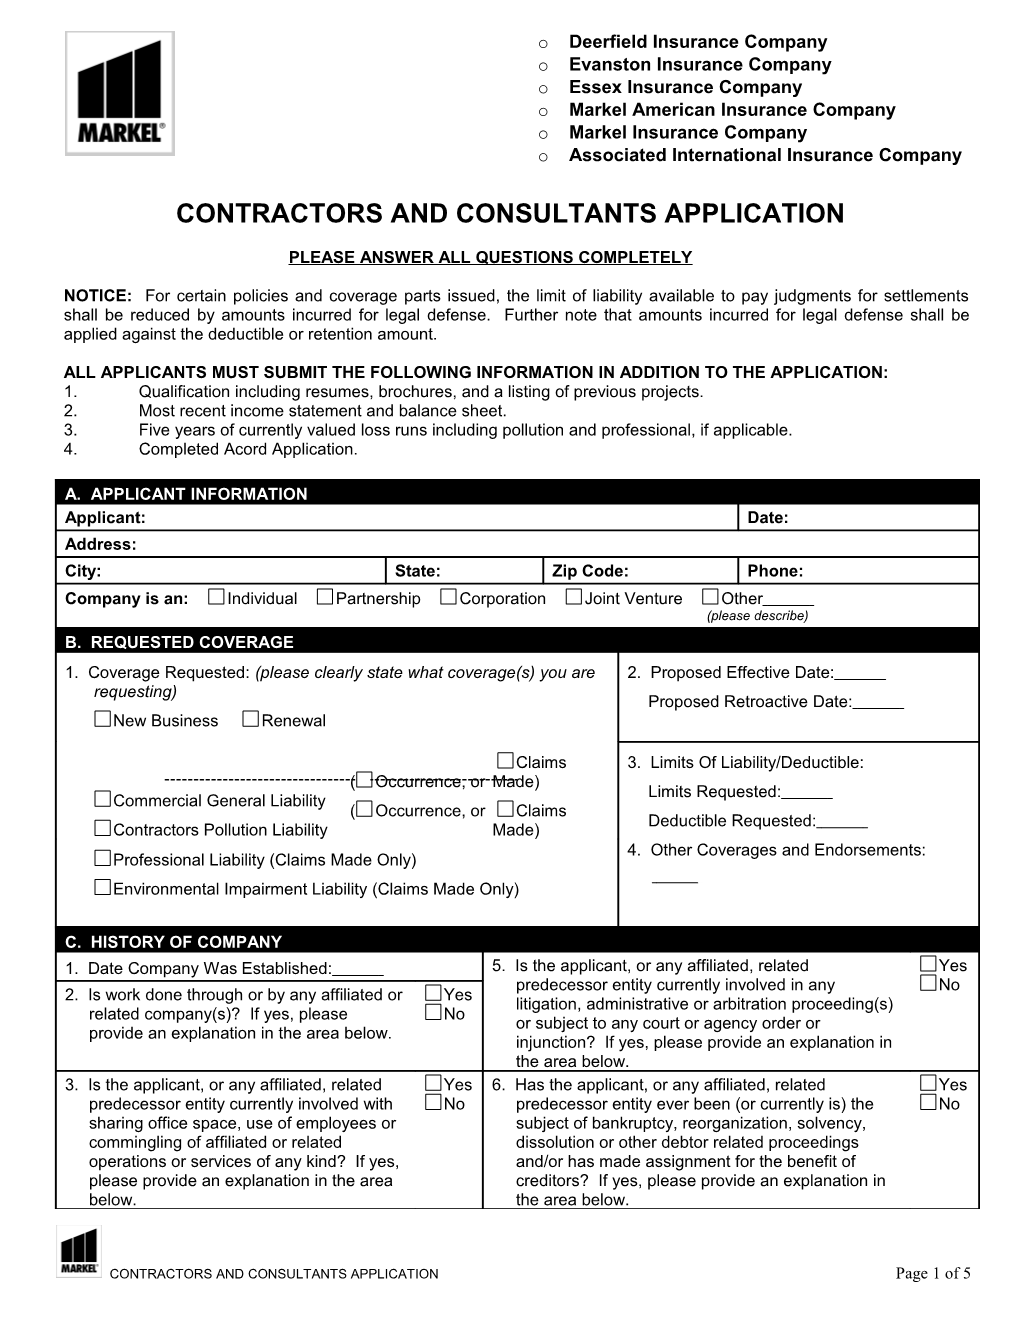 Contractors and Consultants Application